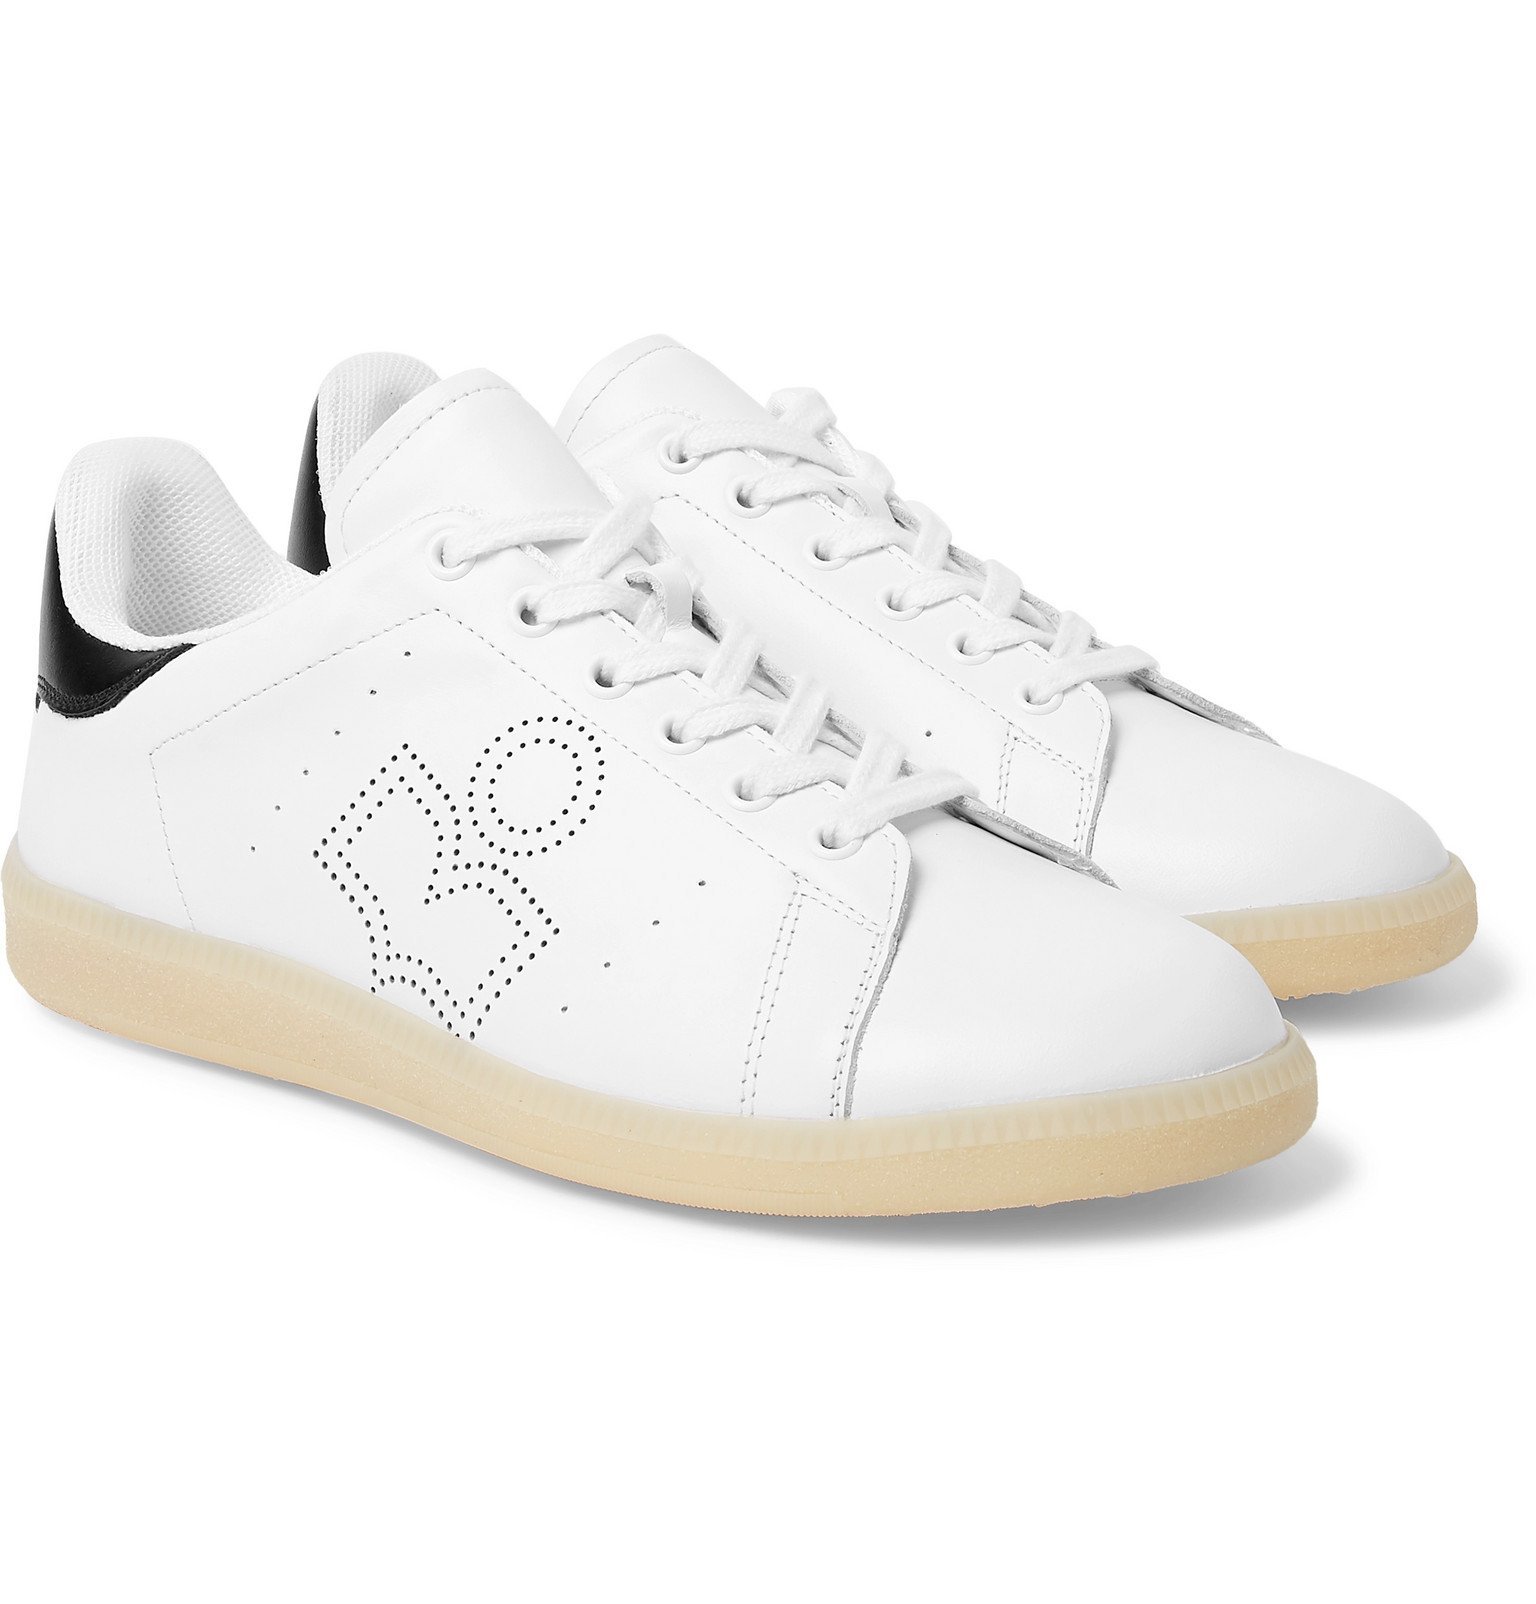 Isabel Marant - Brevka Logo-Perforated Leather Sneakers White Isabel